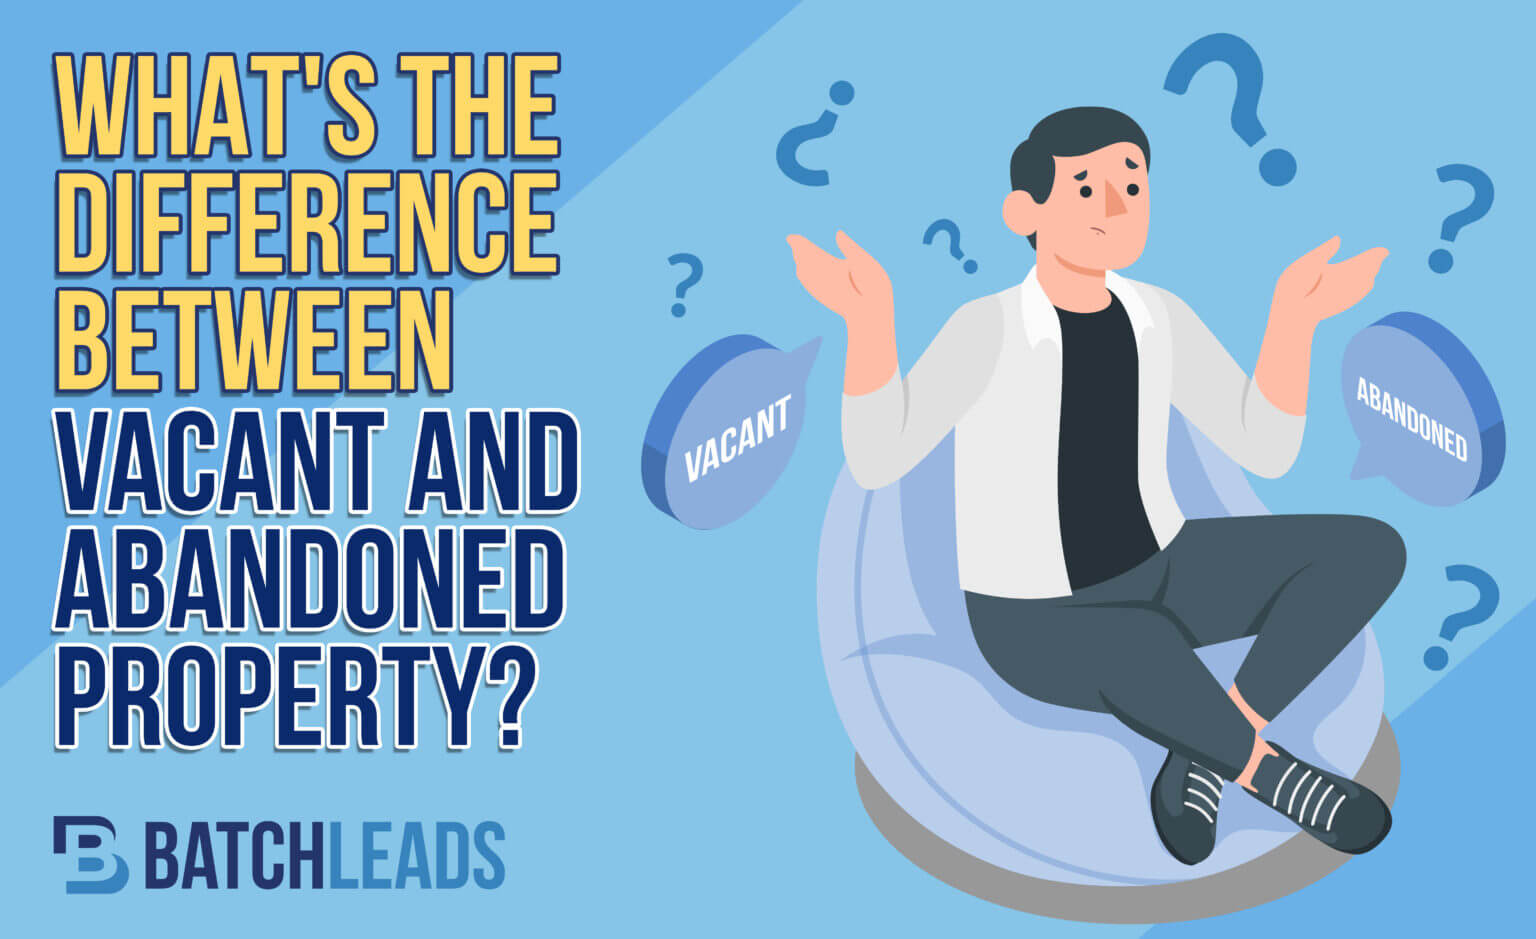 What’s the Difference Between Vacant and Abandoned Property